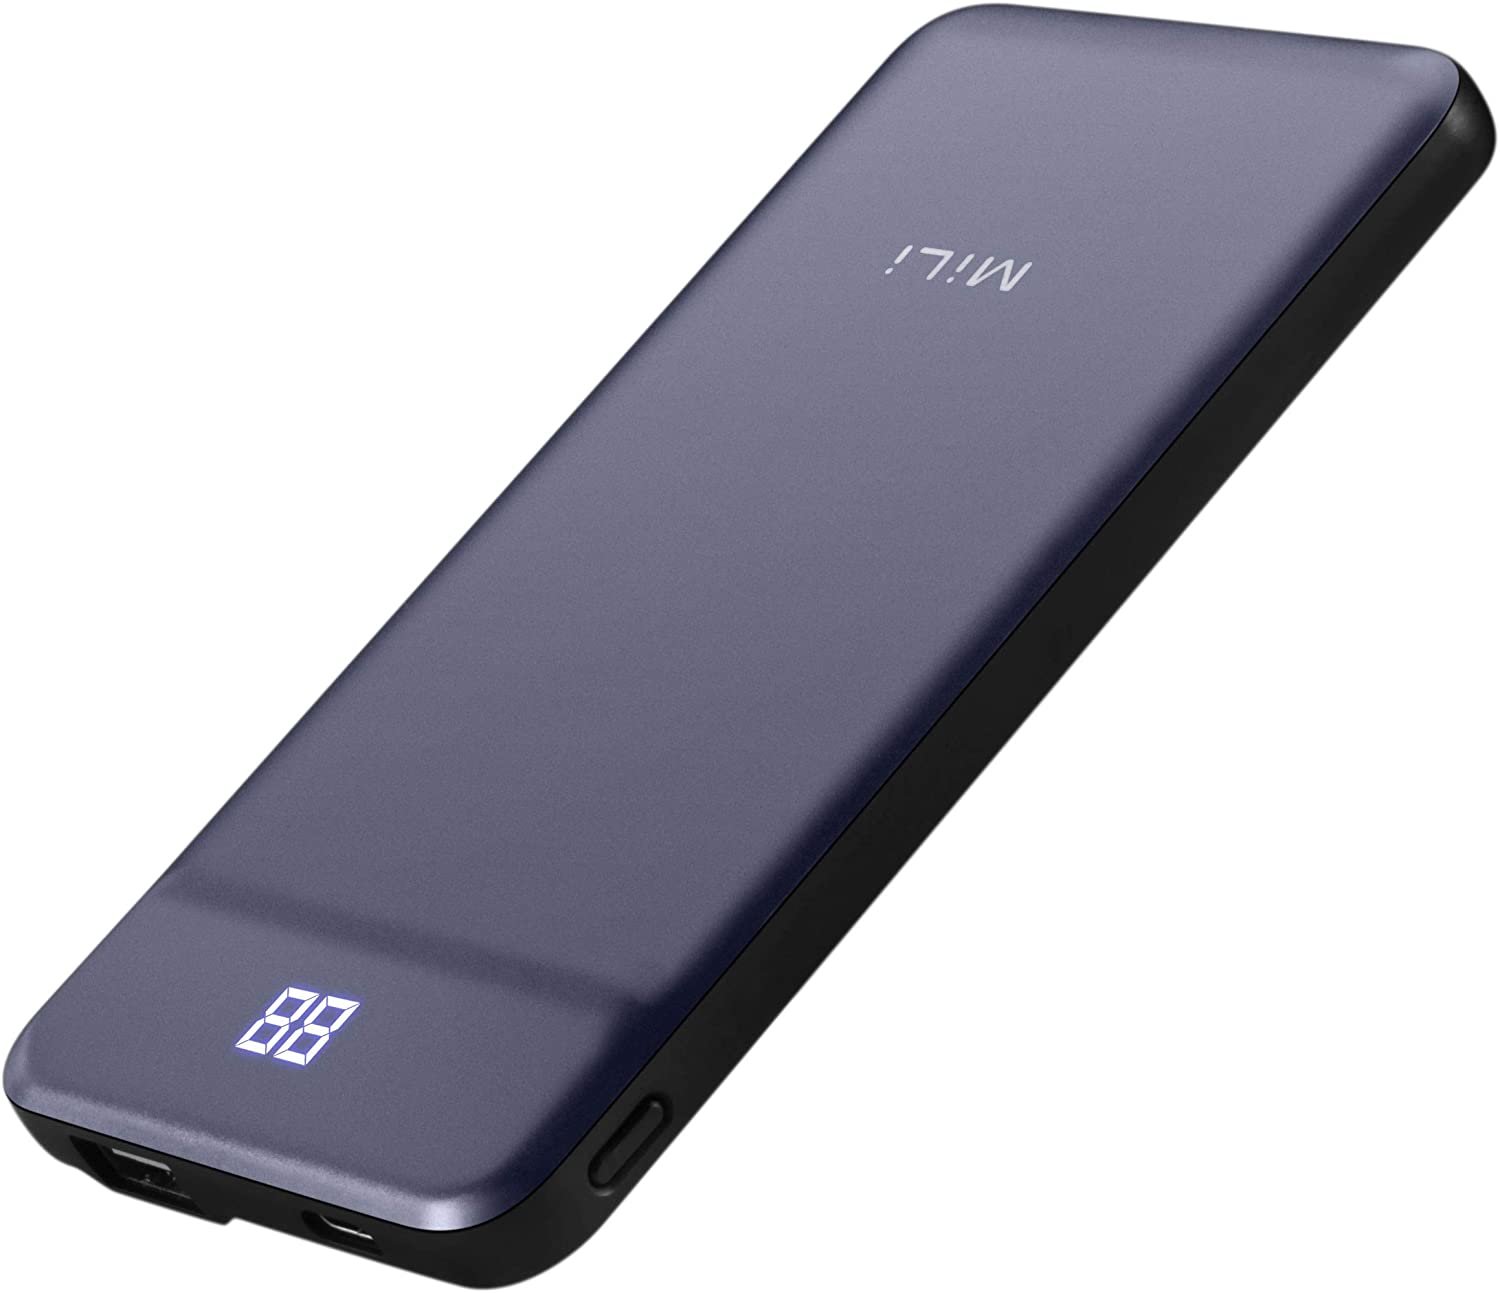 Mili Power Nova III Wired 10,000mAh Power Bank for Mobile Phones - HB-M10-Blue - DNA